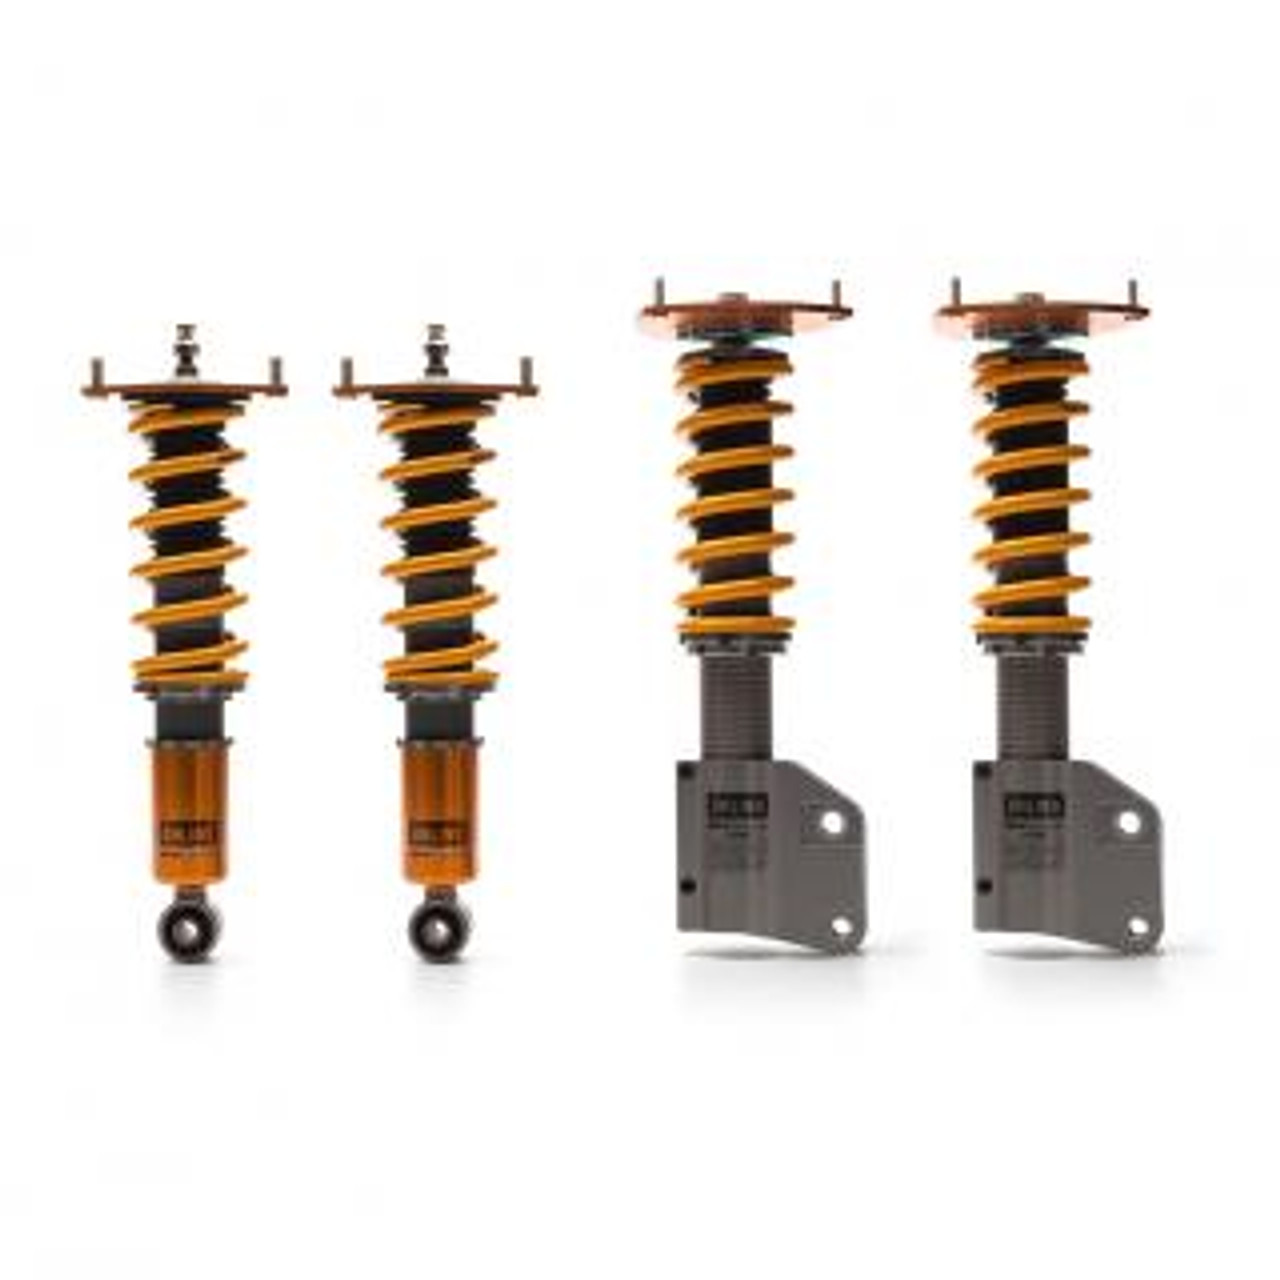 SUBARU COMPETITION READY SUSPENSION PACKAGE - OHLINS ROAD AND TRACK COILOVERS